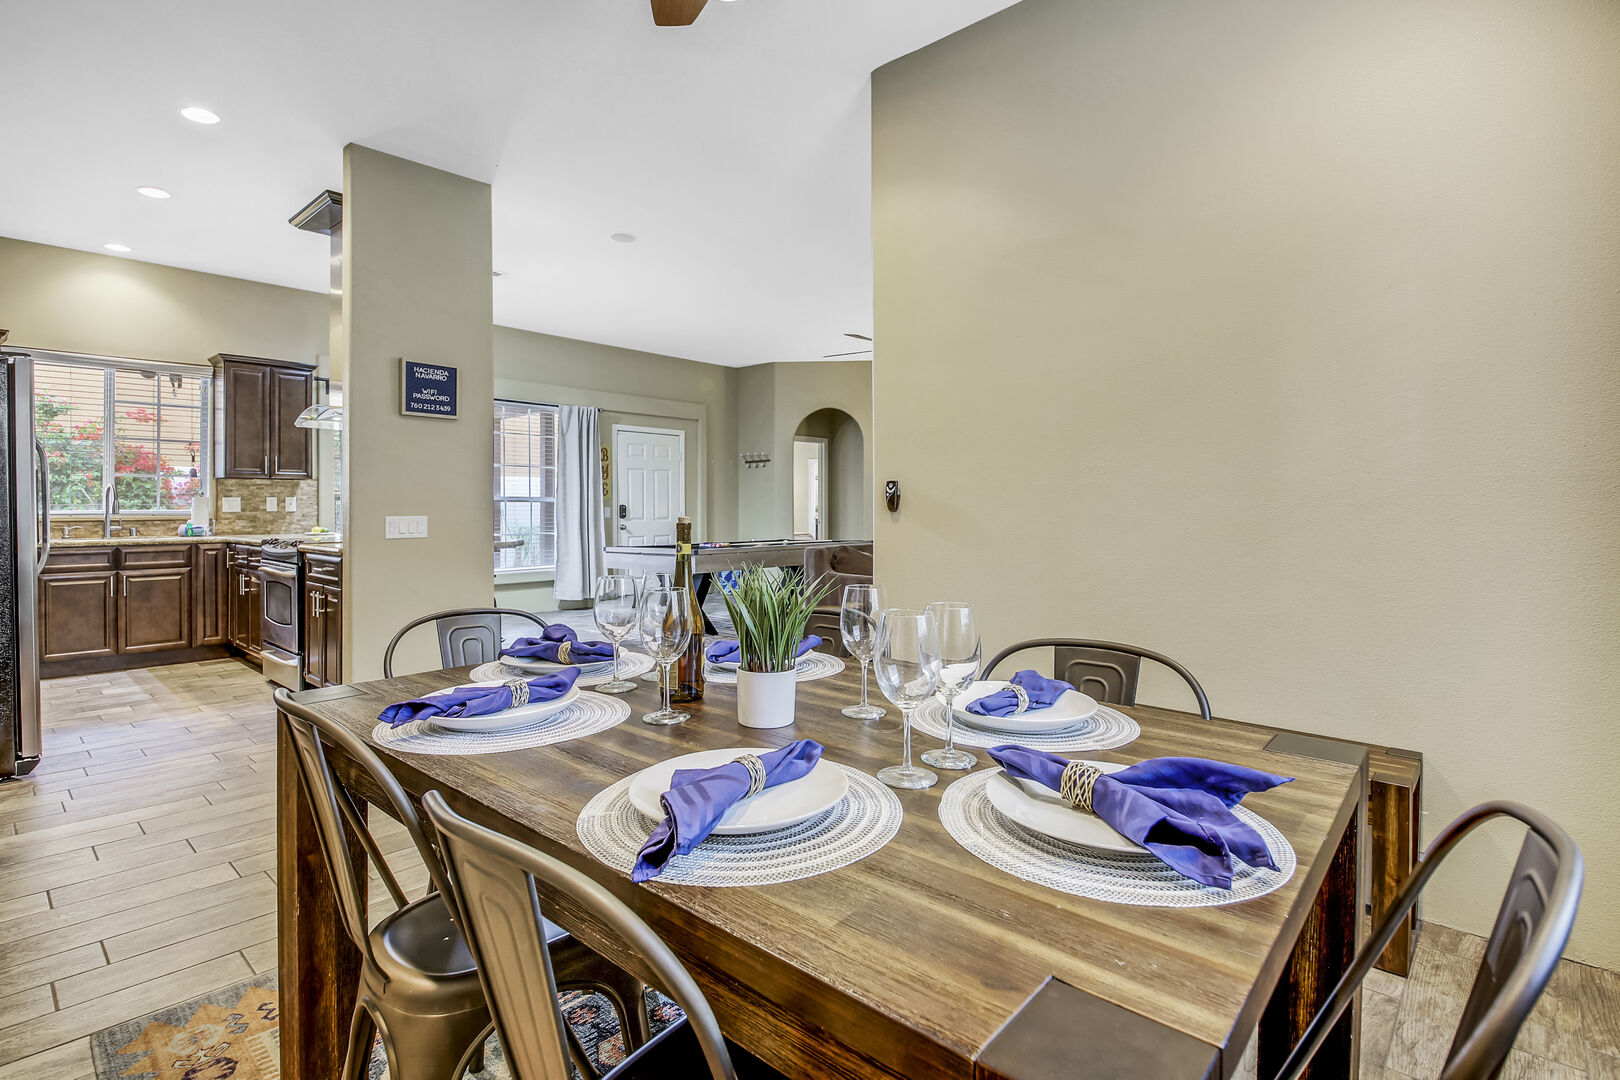 The casual dining area features a dining table with seating for six.